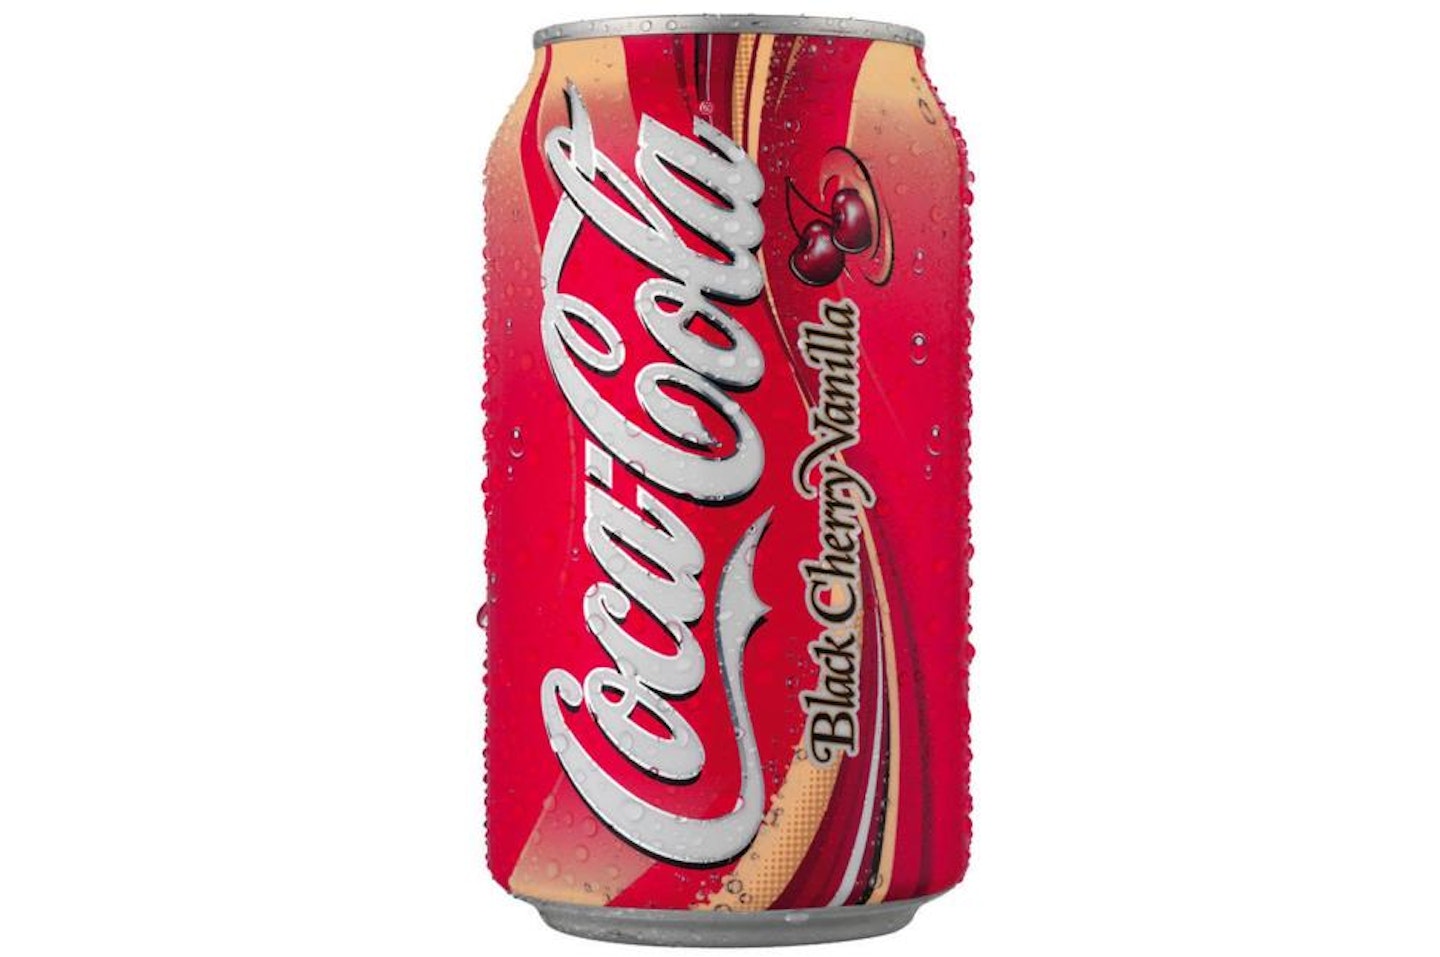 Fizzy Drinks That Are Extinct